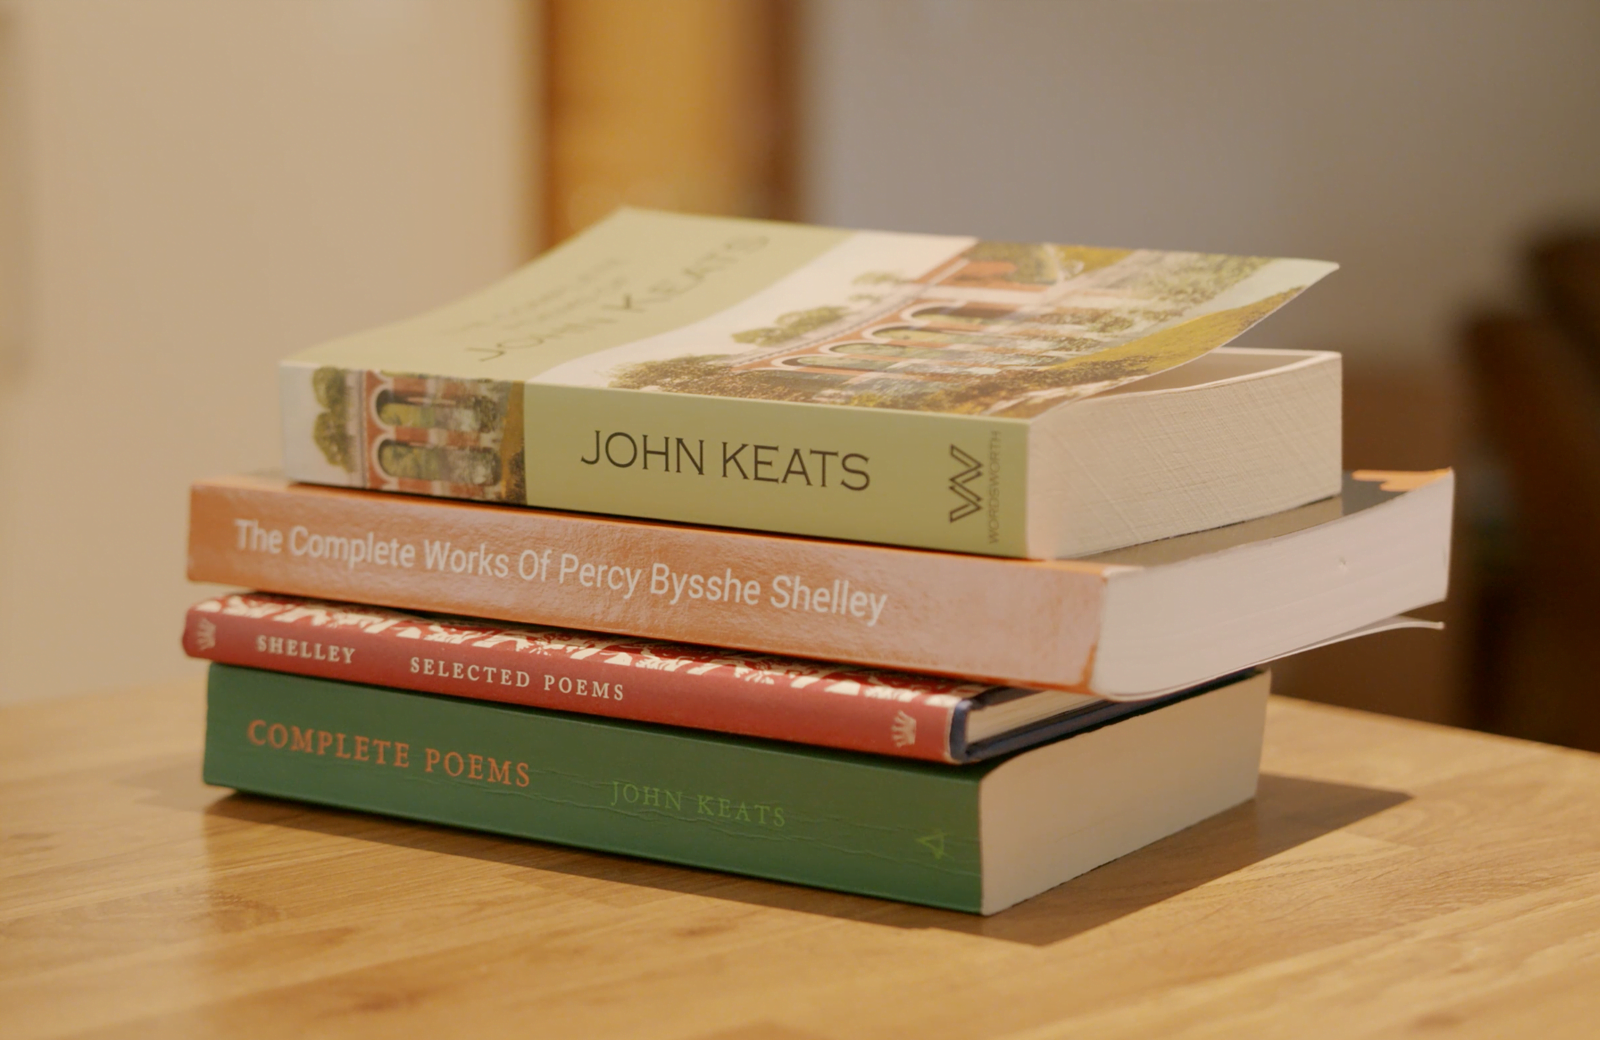 A stack of books from John Keats on a table